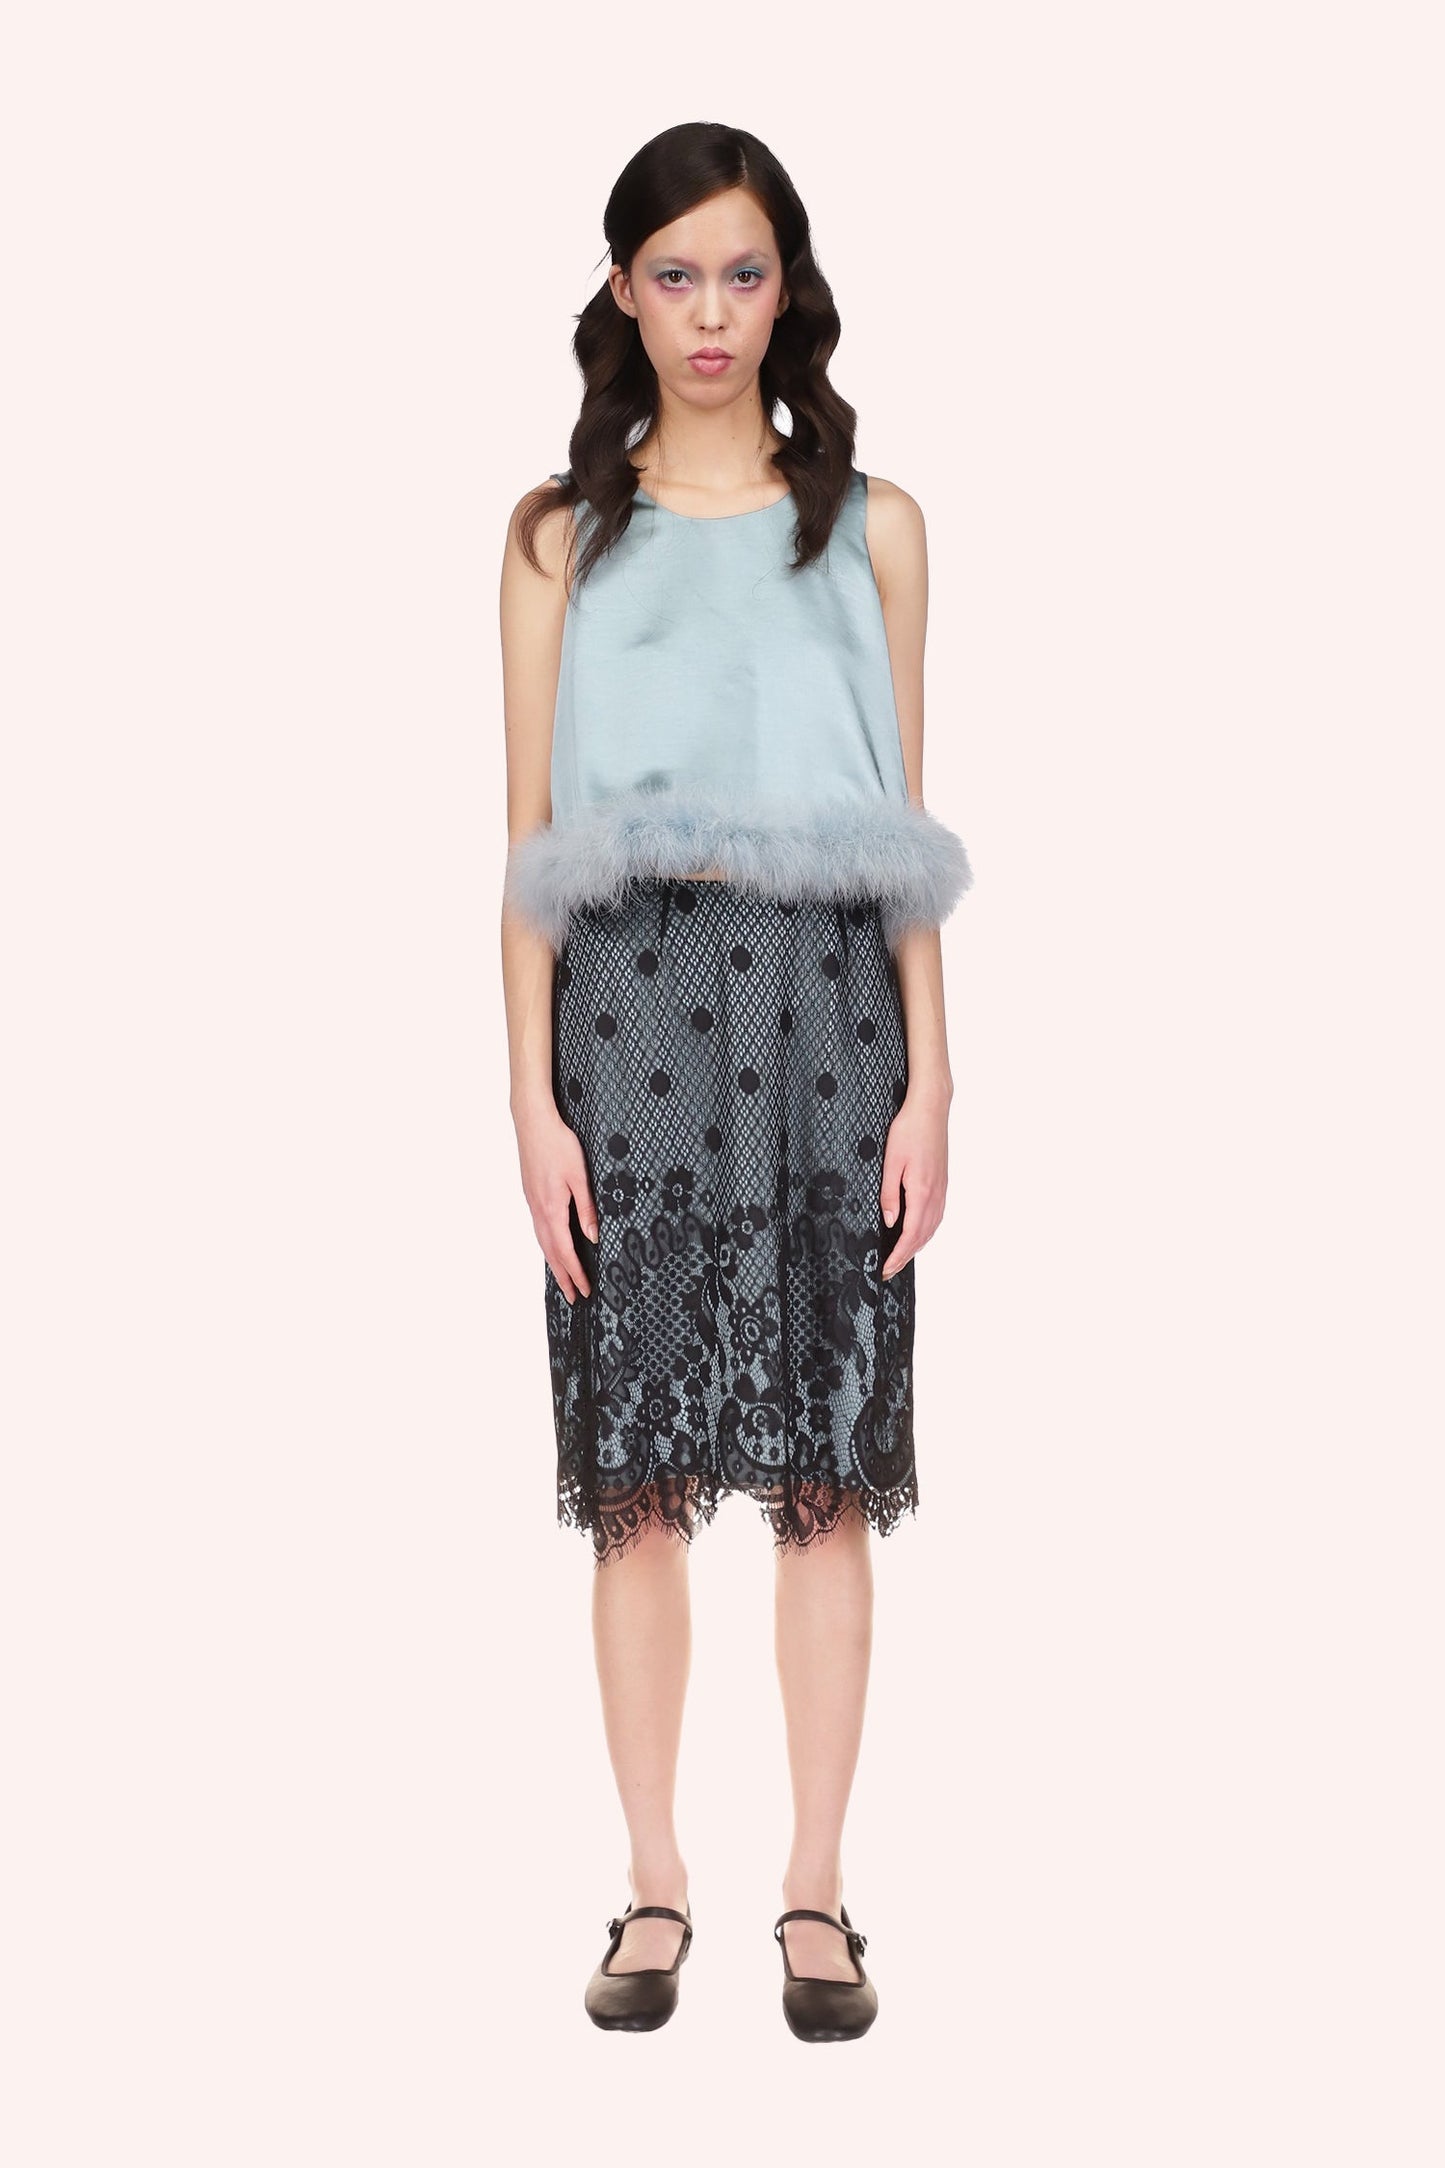 Washed Dusty Blue Satin with Lace Top Trimmed with Marabou Feather at waistline, round collar